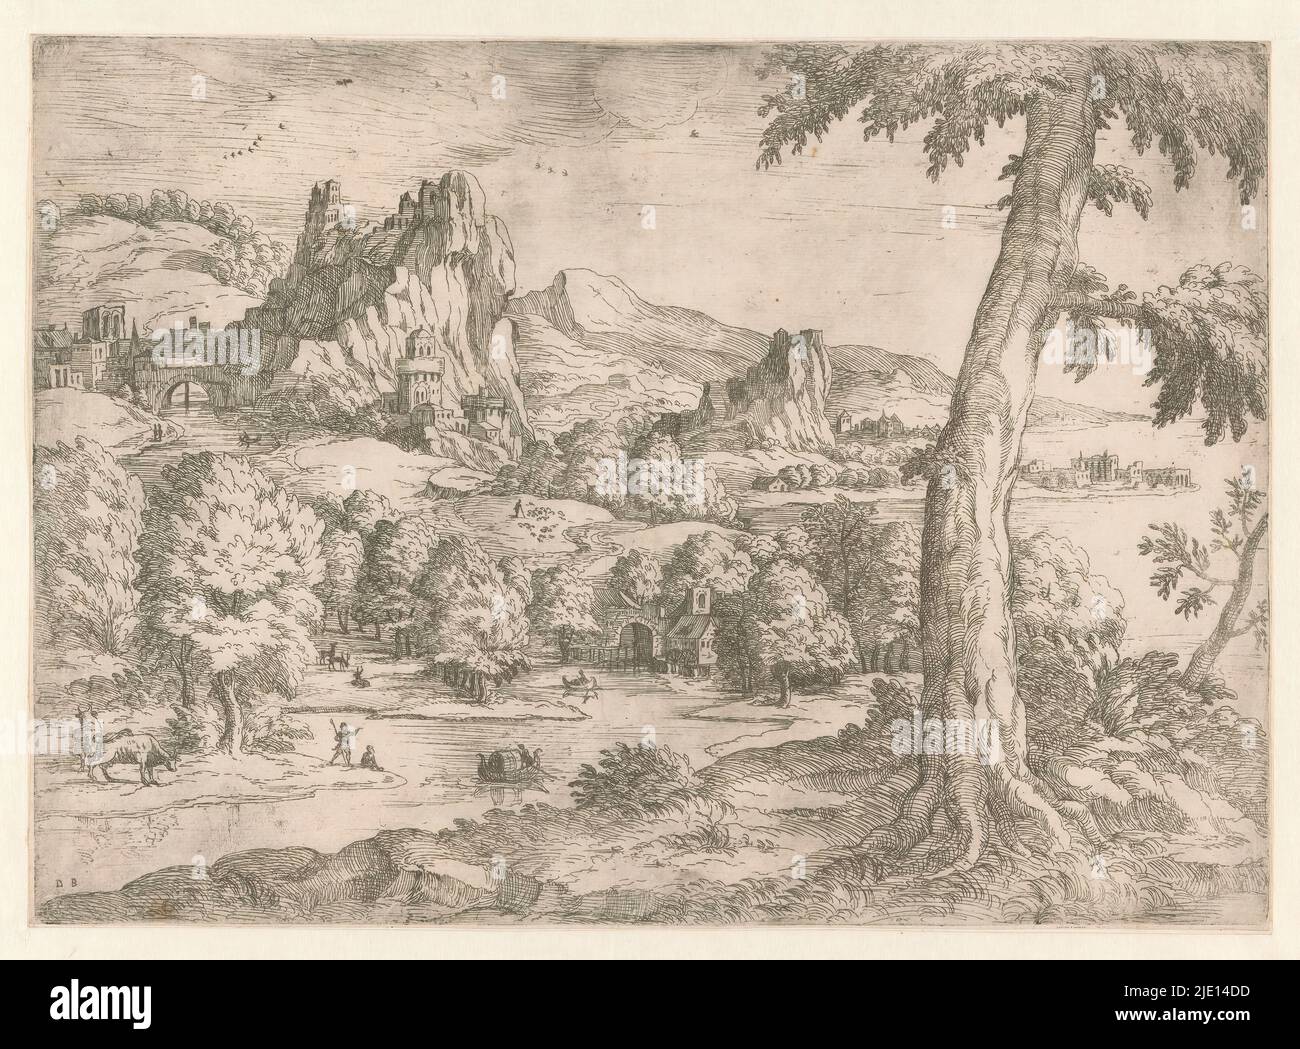 Panoramic landscape with large tree, Panoramic landscape with a large tree in the foreground right. In the center plan a river with gondola and cattle and deer among the bushes. In the background a coastal landscape with mountains and a city., print maker: Monogrammist DB (etser 16de eeuw), (mentioned on object), print maker: Dirck Barendsz., (rejected attribution), Italy, c. 1560 - c. 1580, paper, etching, height 308 mm × width 428 mm Stock Photo